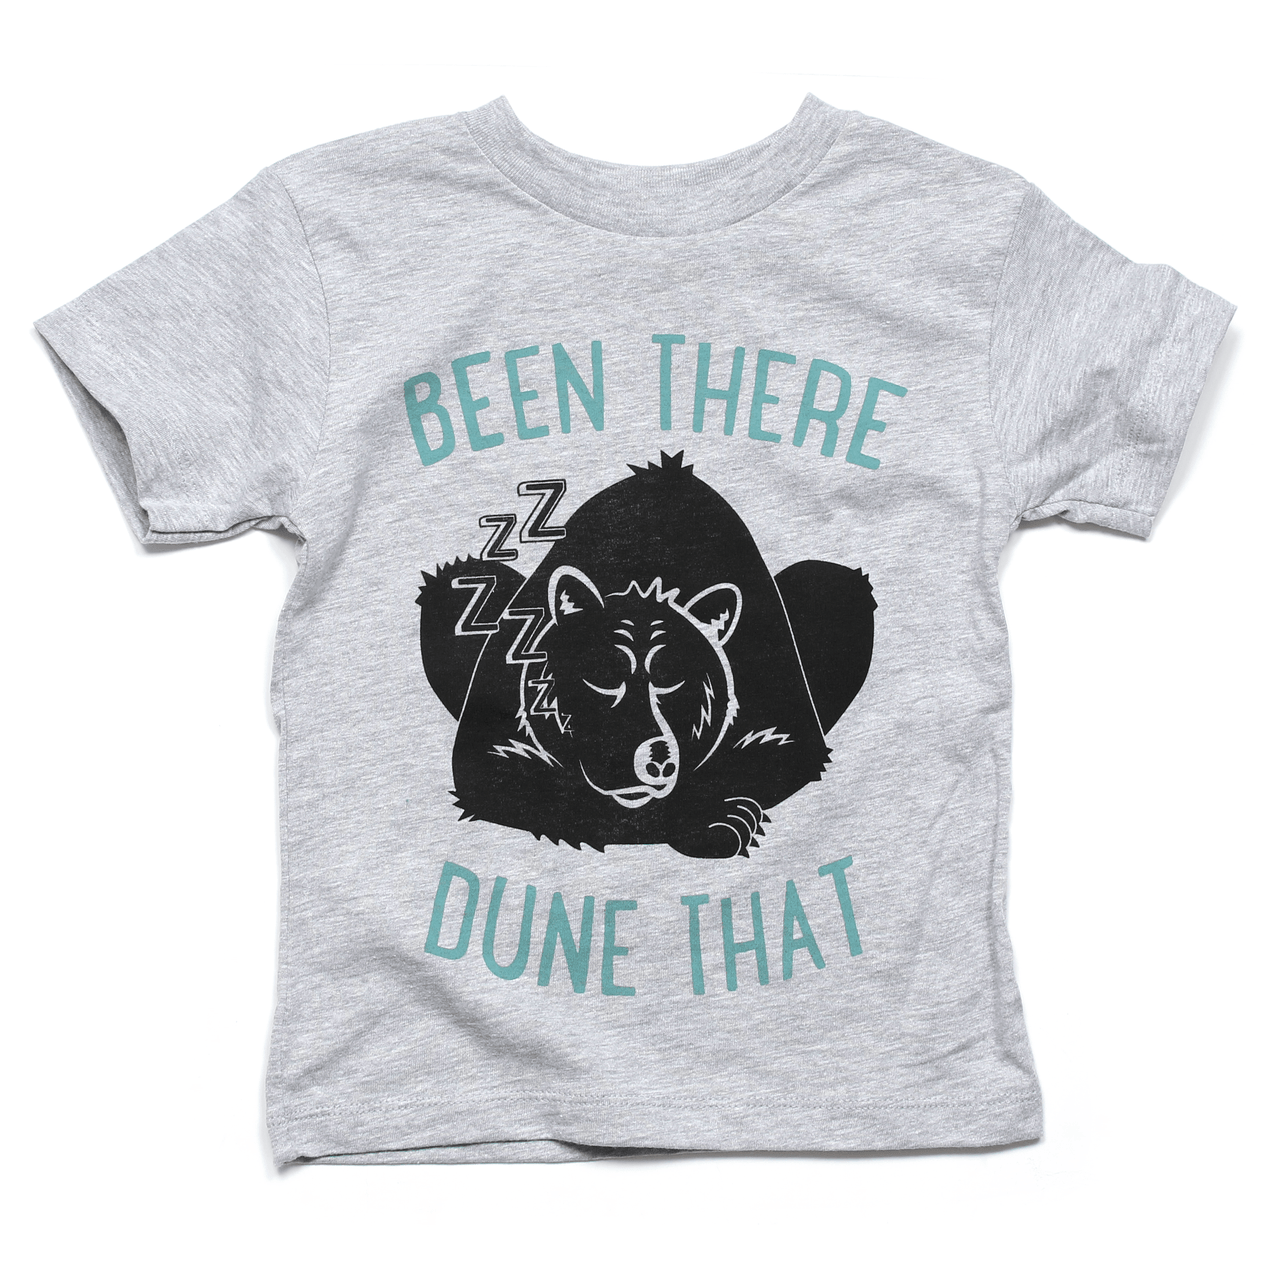 Been There, Dune That Toddler Tee